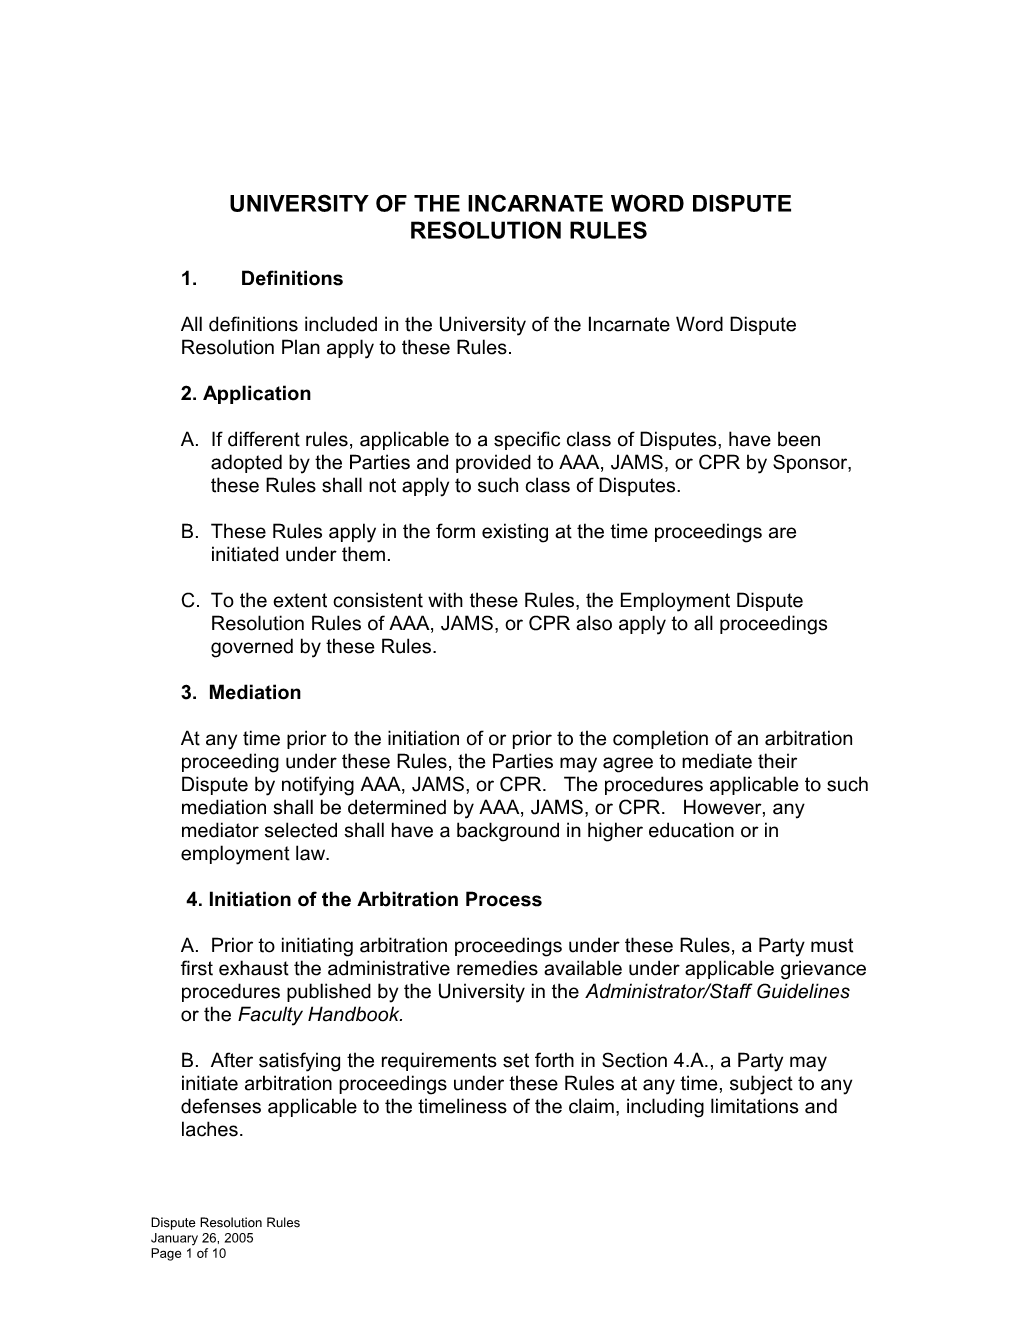 University of the Incarnate Word Dispute Resolution Rules